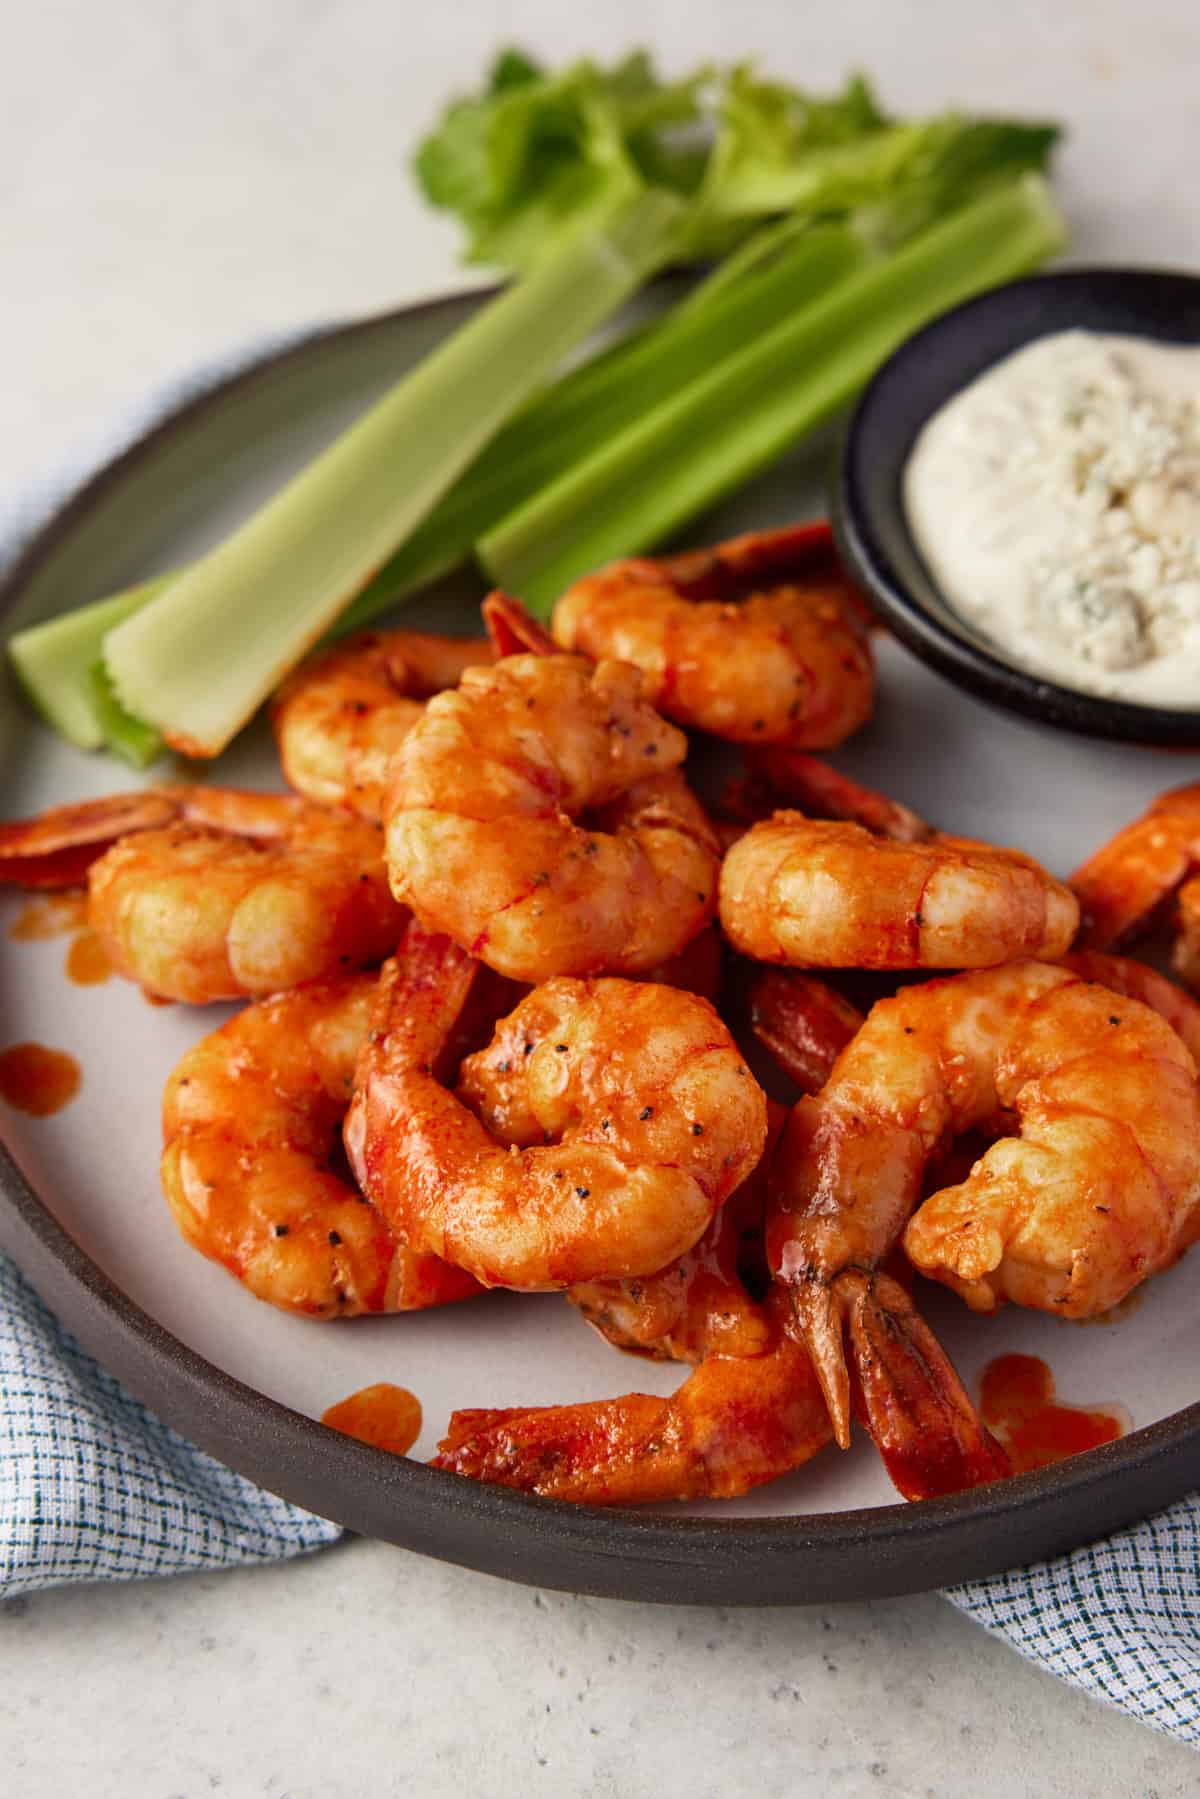 Spicy shrimp on a plate with celery sticks.